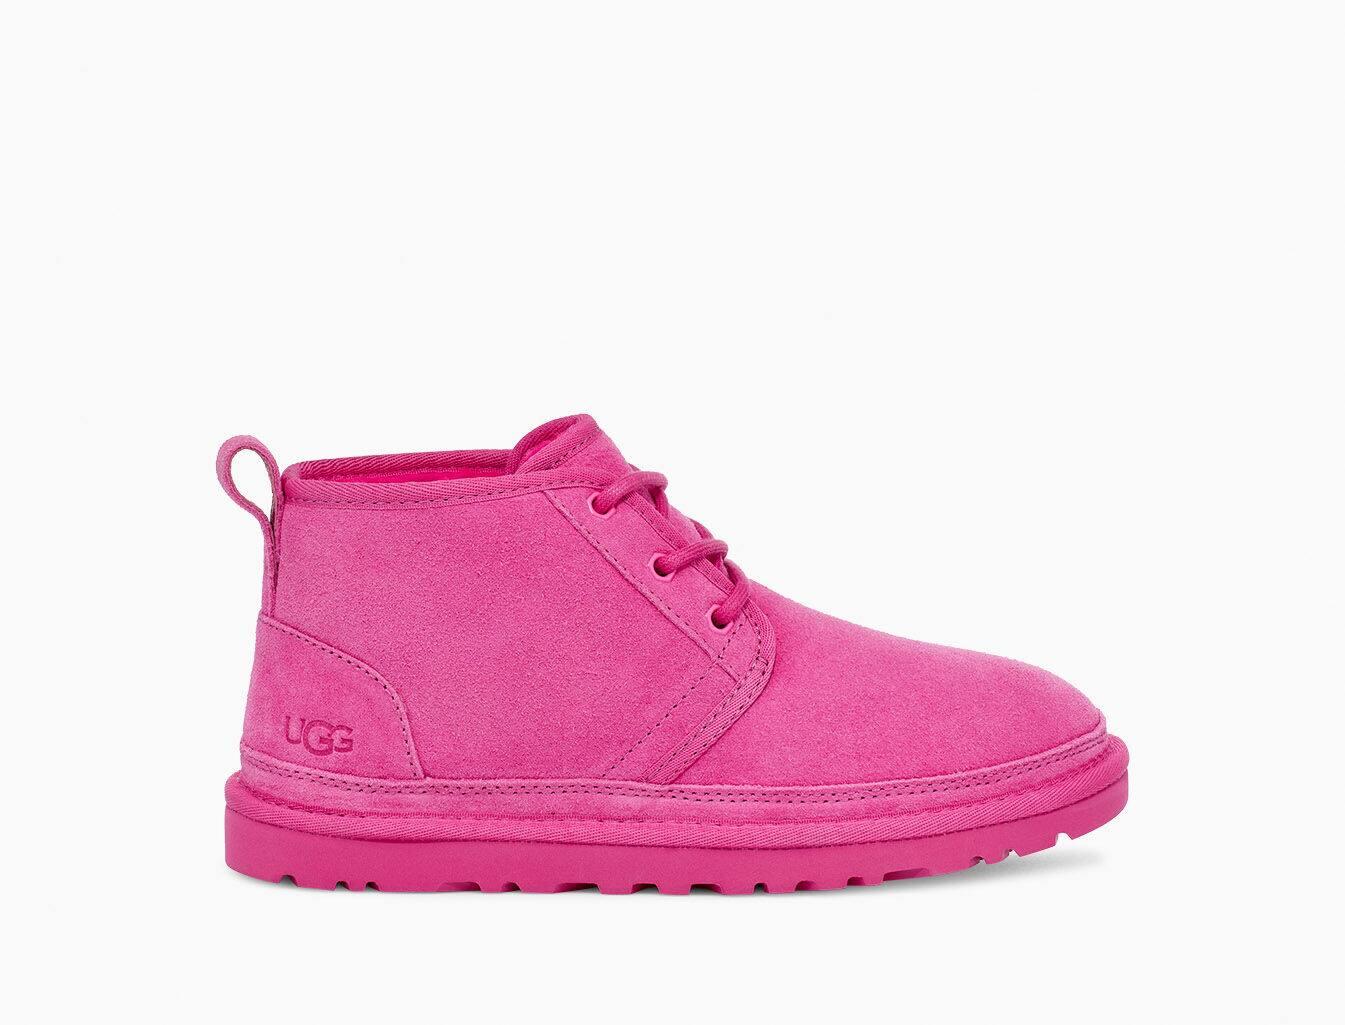 UGG Wool Neumel Boot in Pink - Save 7 